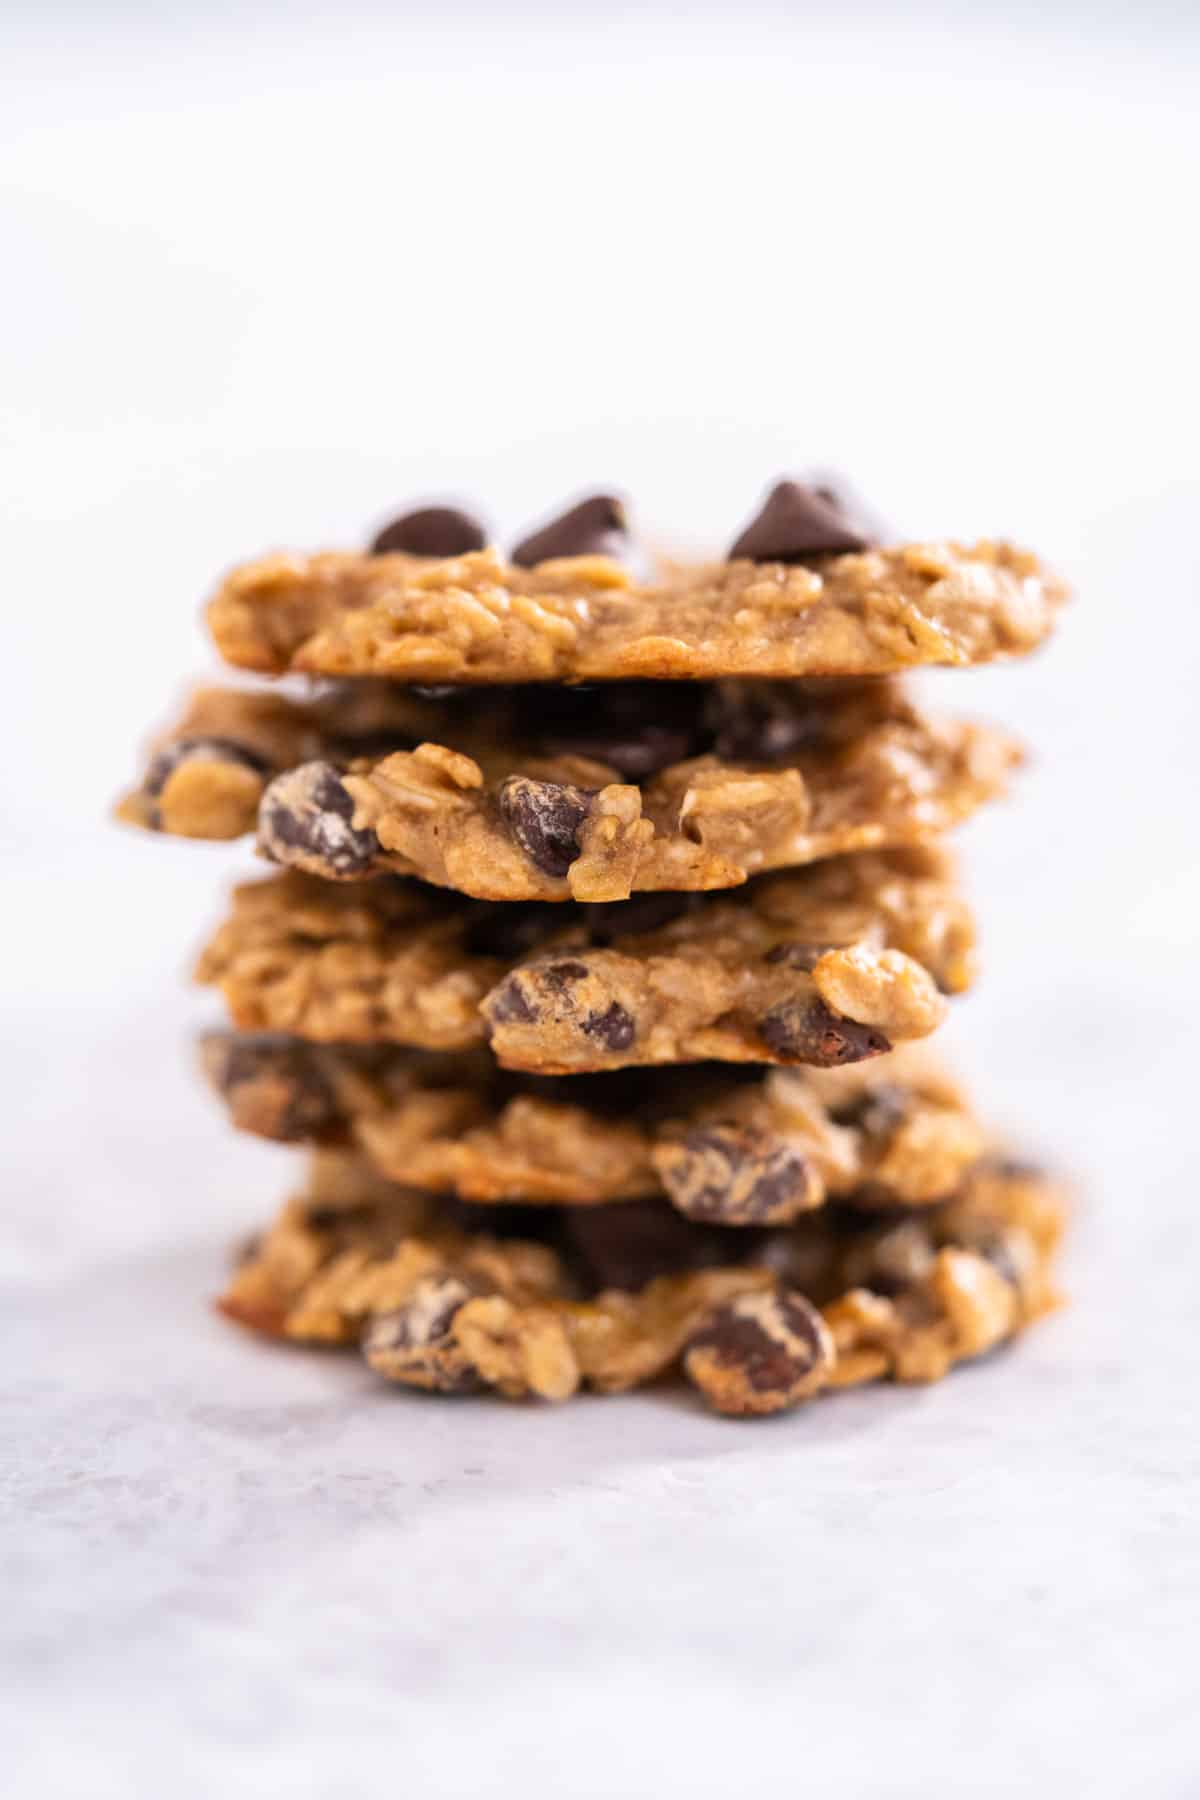 A stack of five 3 ingredient banana oatmeal cookies.